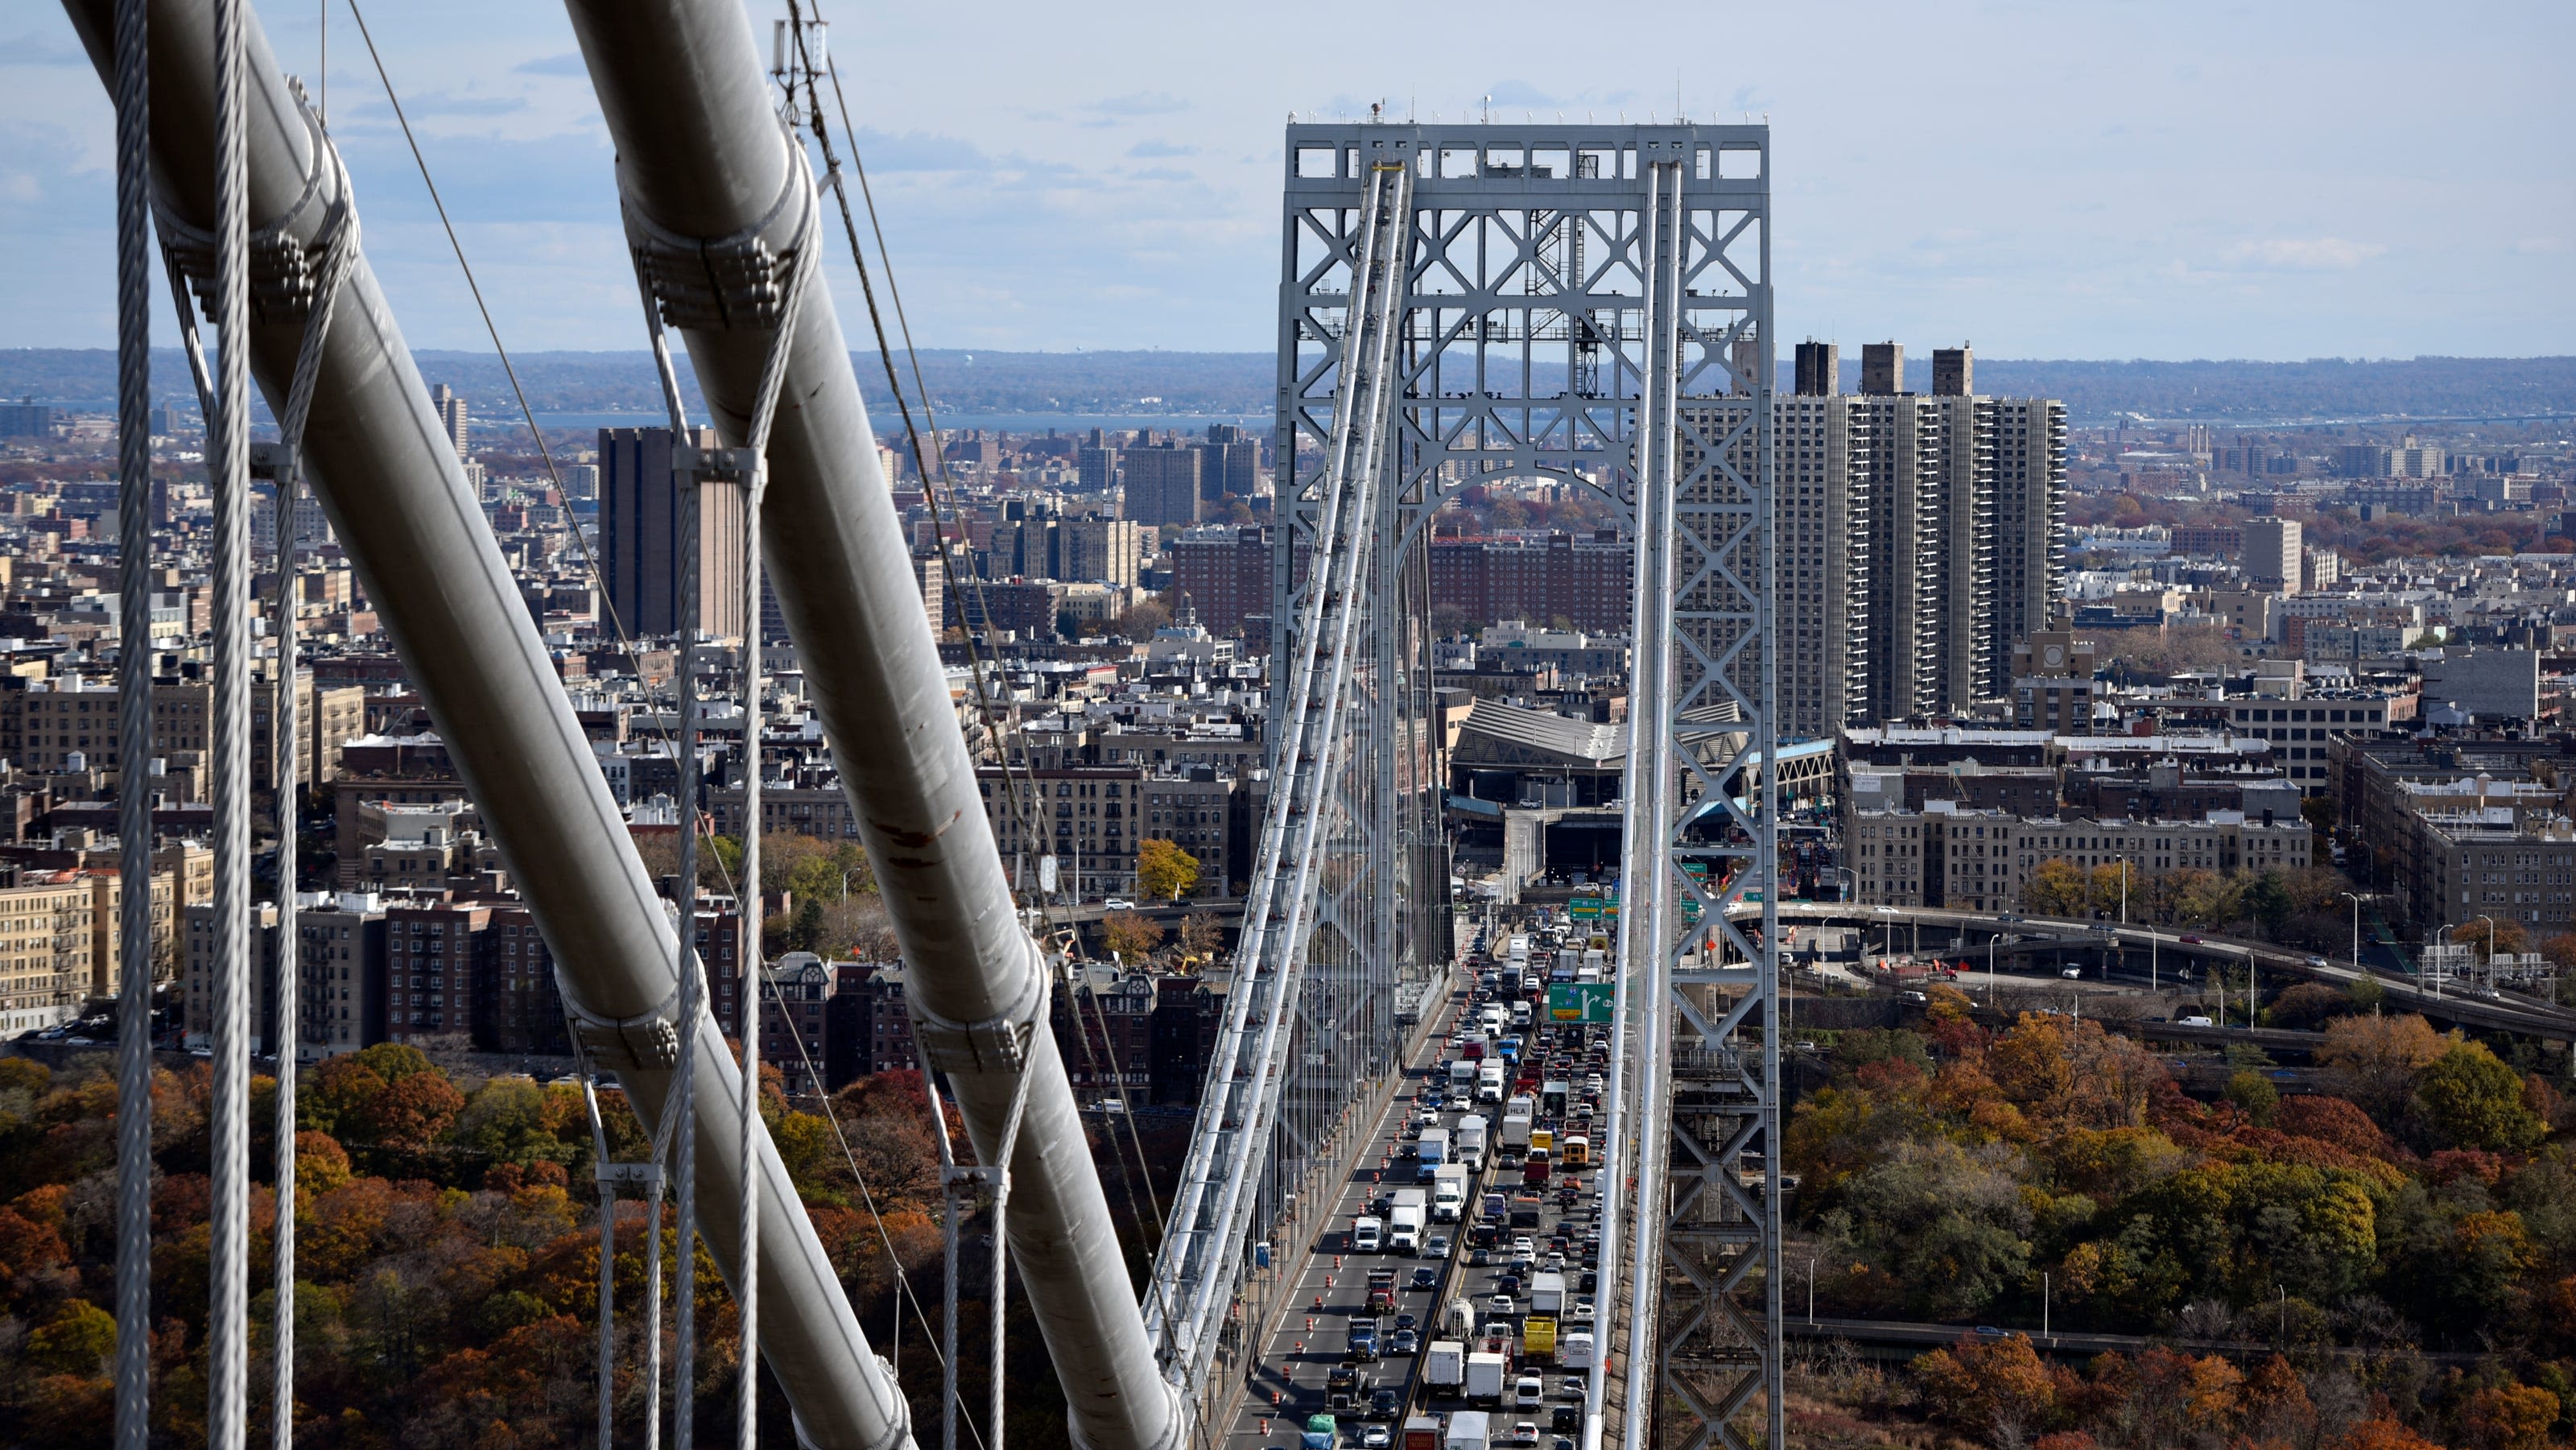 Person climbing George Washington Bridge has been removed, but massive traffic delays remain